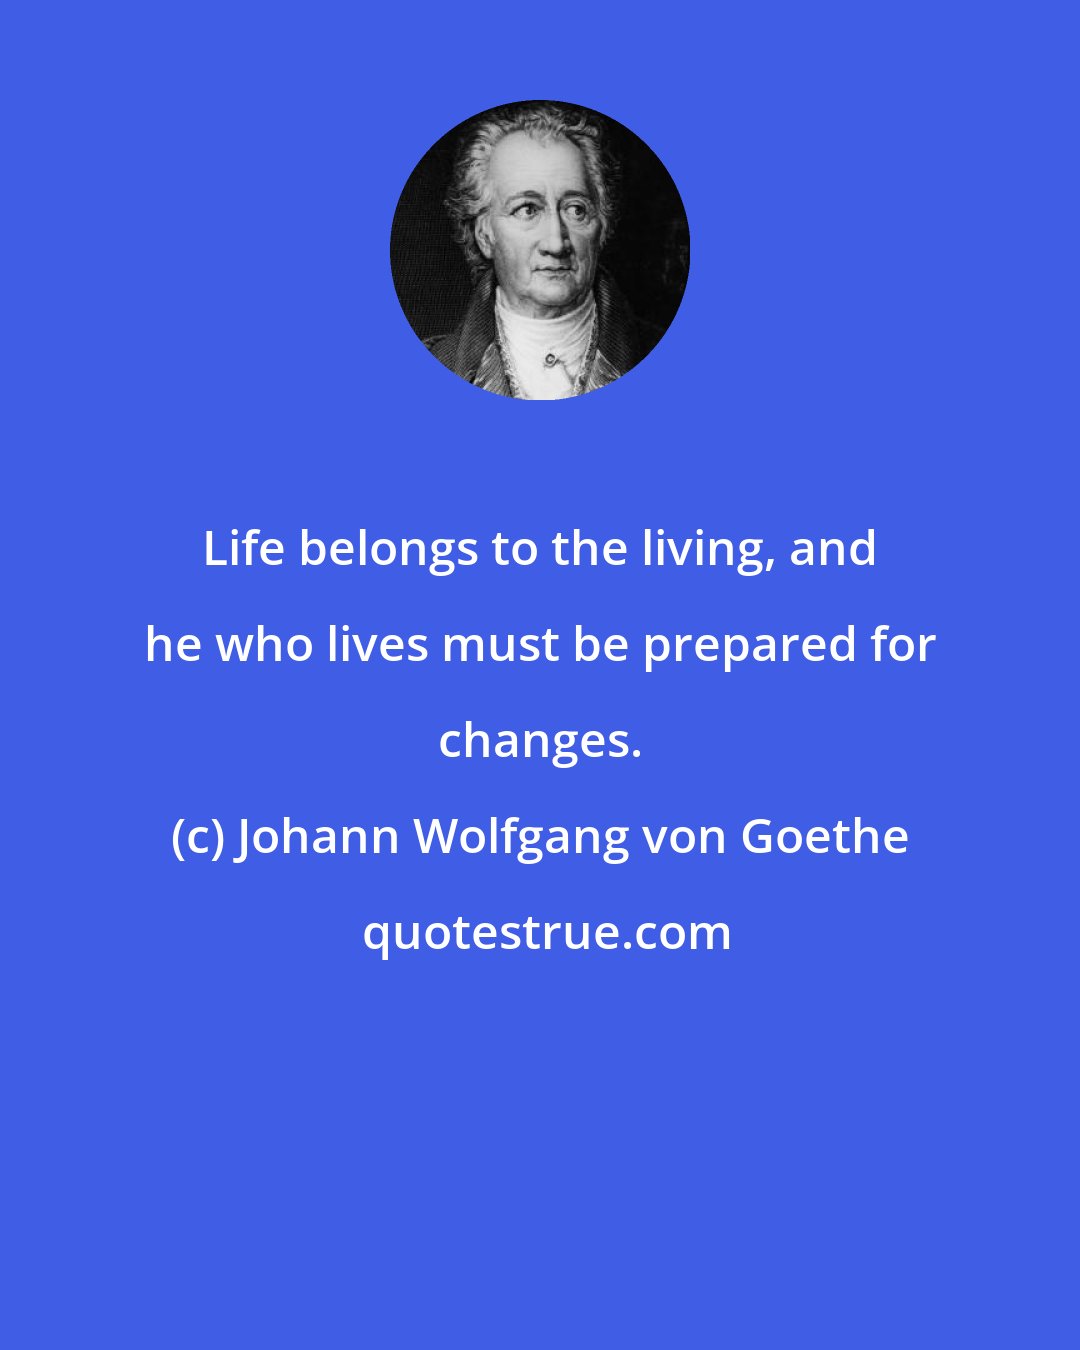 Johann Wolfgang von Goethe: Life belongs to the living, and he who lives must be prepared for changes.